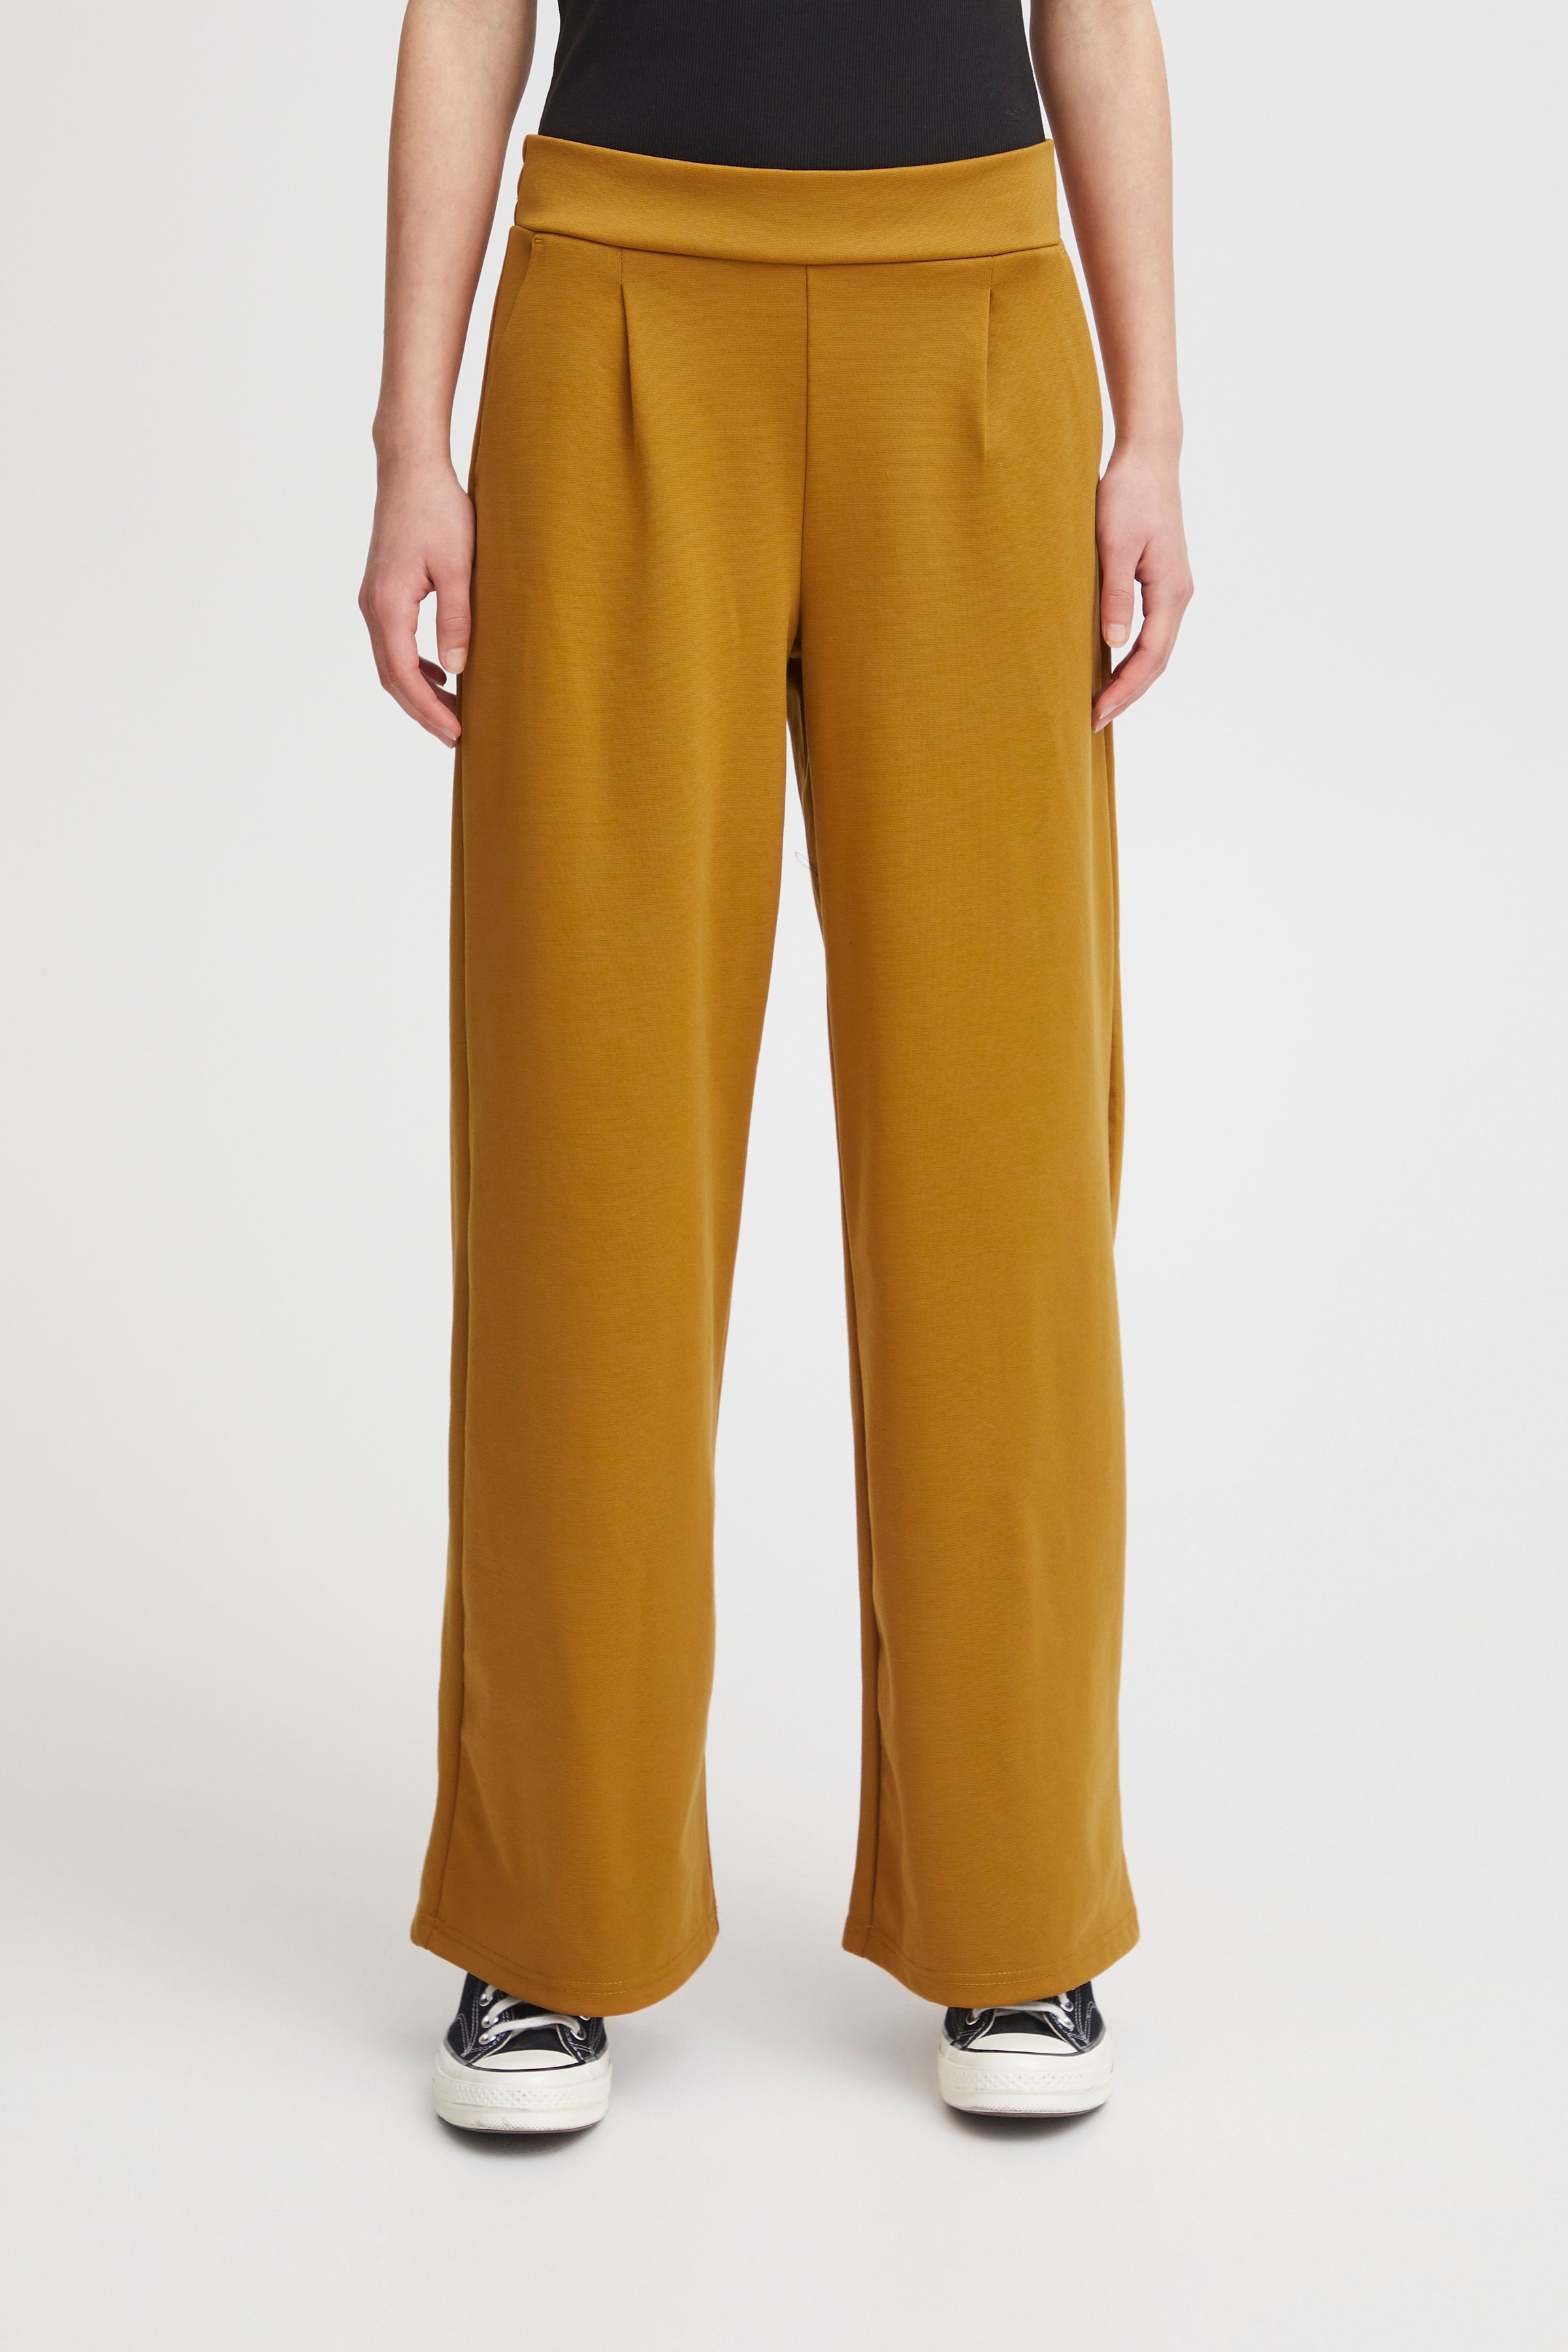 IHKate Sus Long Wide Pant - Cathy Spice